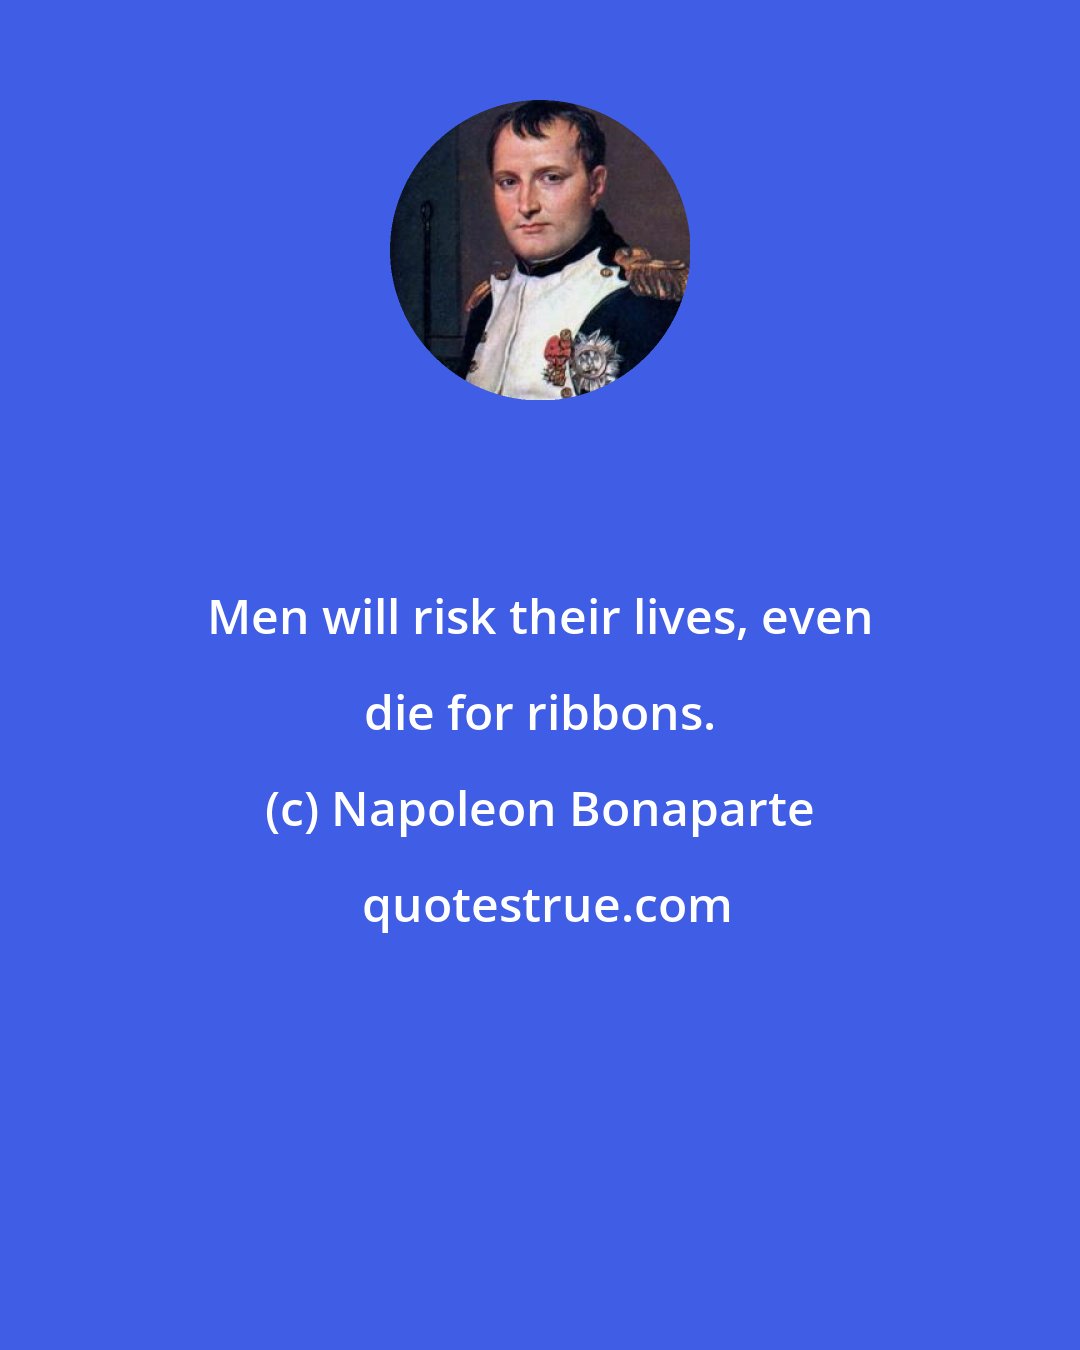 Napoleon Bonaparte: Men will risk their lives, even die for ribbons.